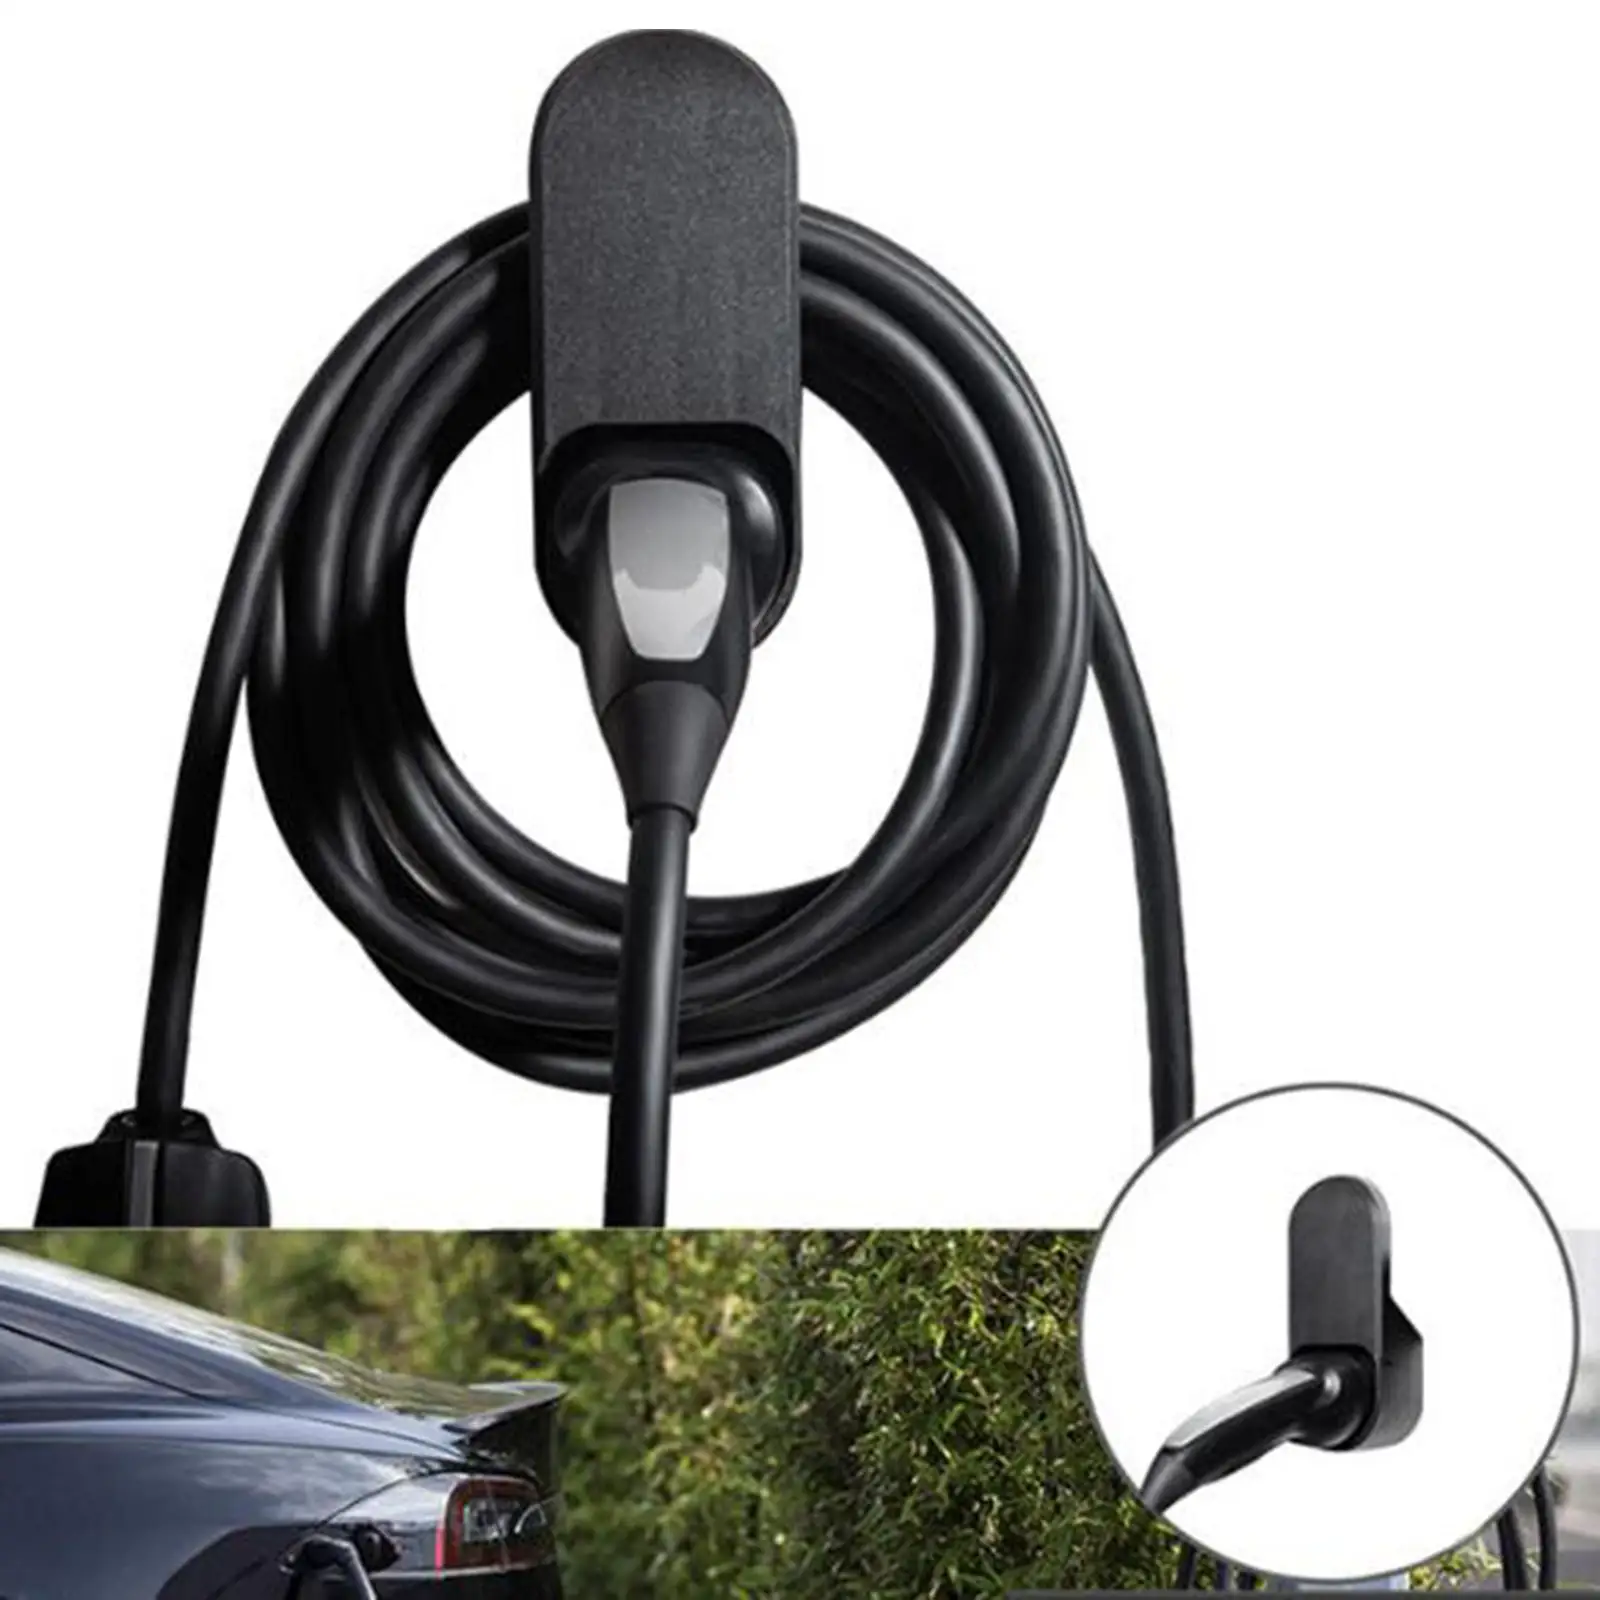 Charger Wall Holder Mount Cord Holder Portable Bracket Easy to Install Adapter Car Charging Cable Holder for Tesla Model x